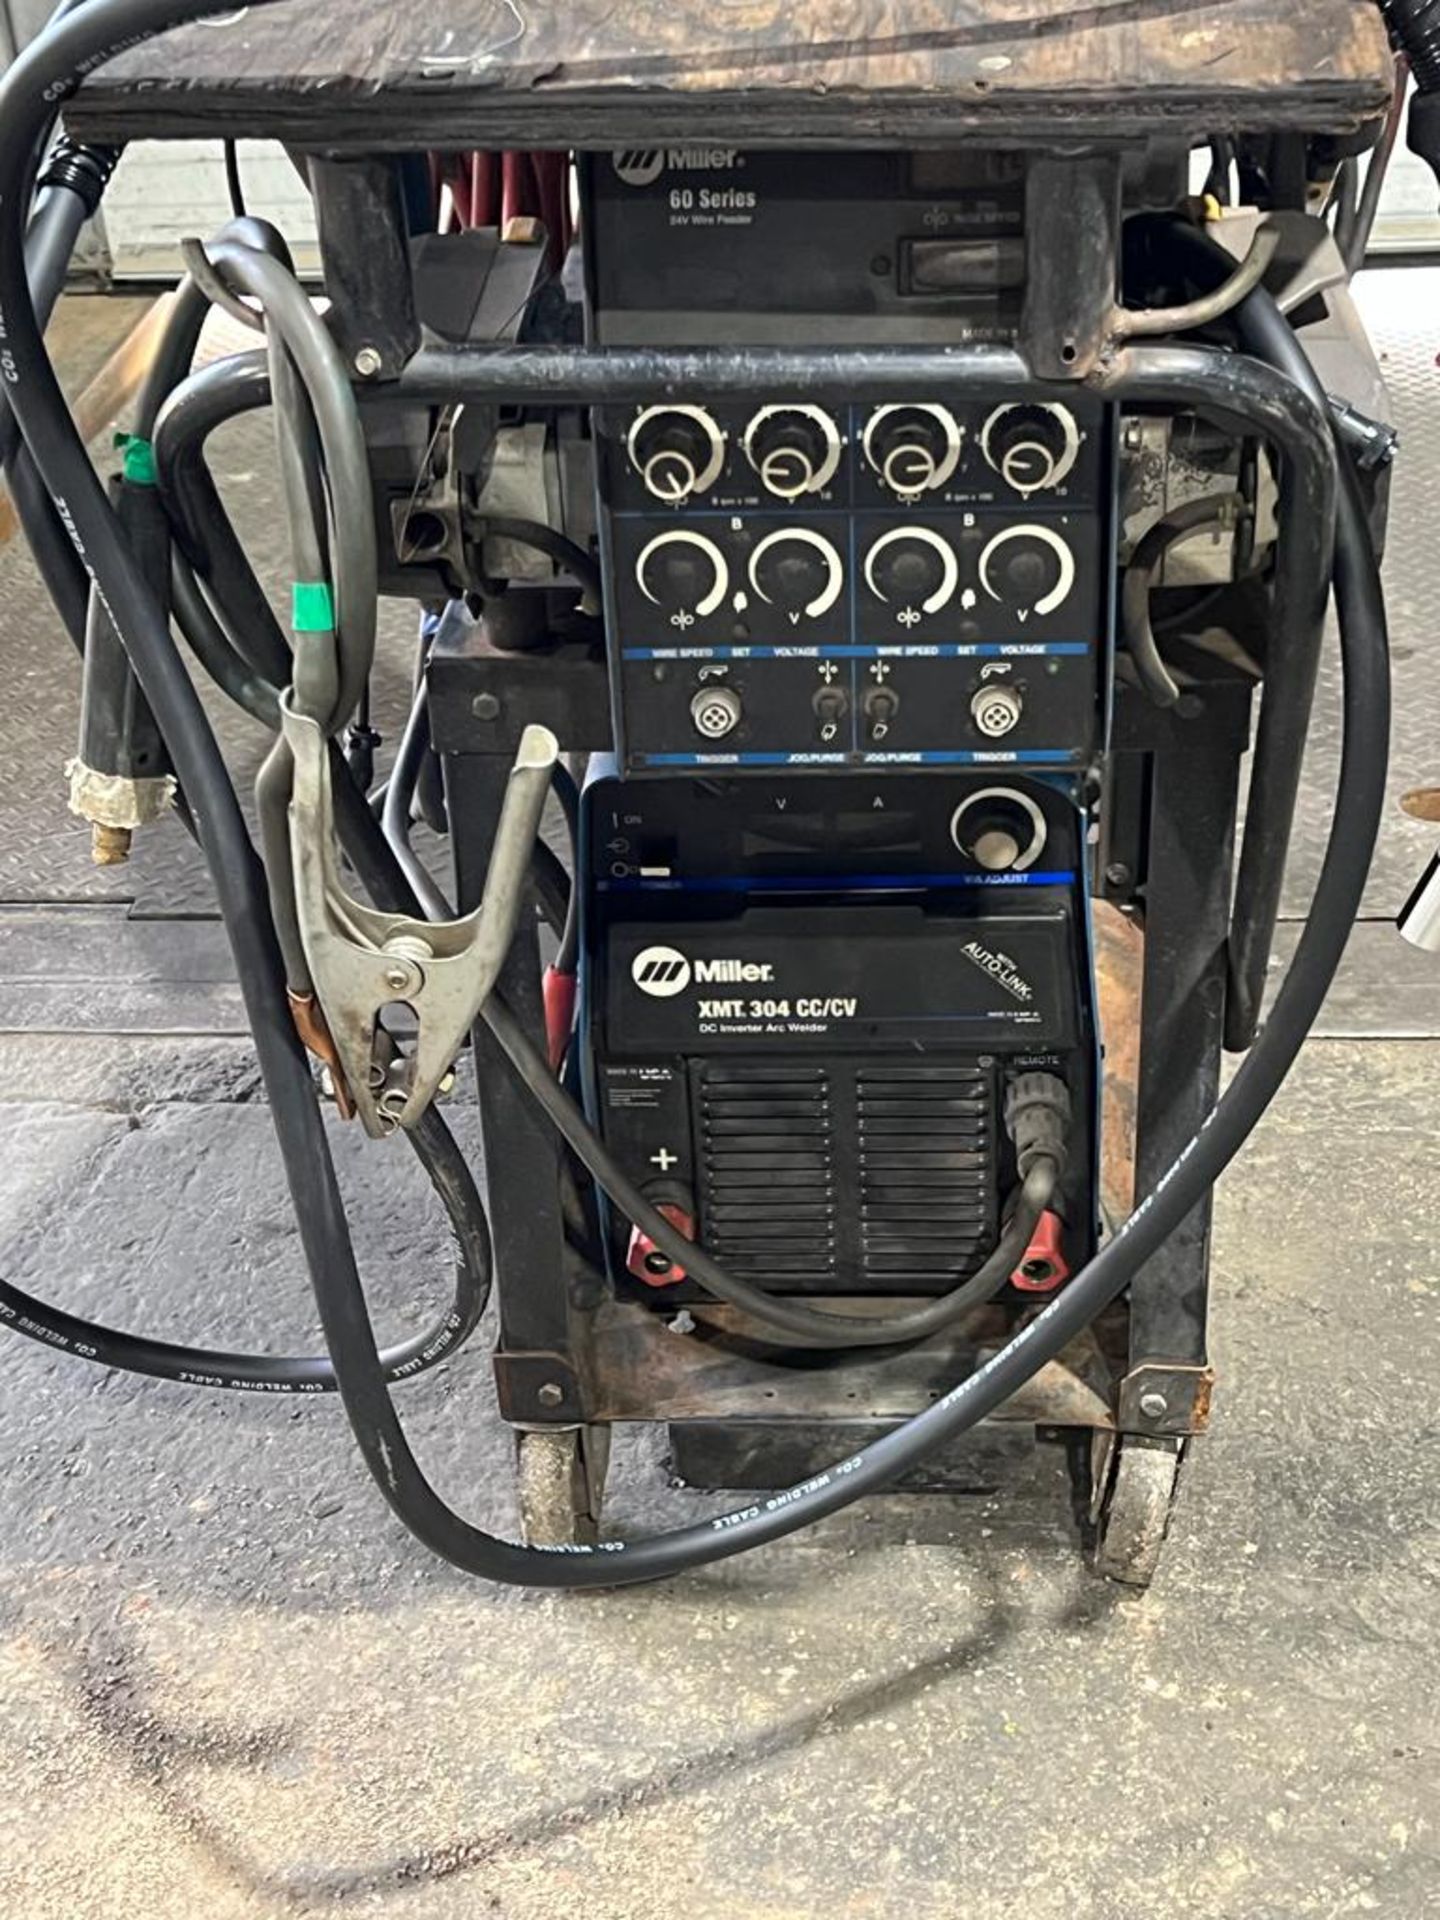 Miller XMT 304 CC/CV DC Inverter Multi Process Welder with DUAL 4-Wheel 60 Serial Feeder COMPLETE - Image 2 of 3